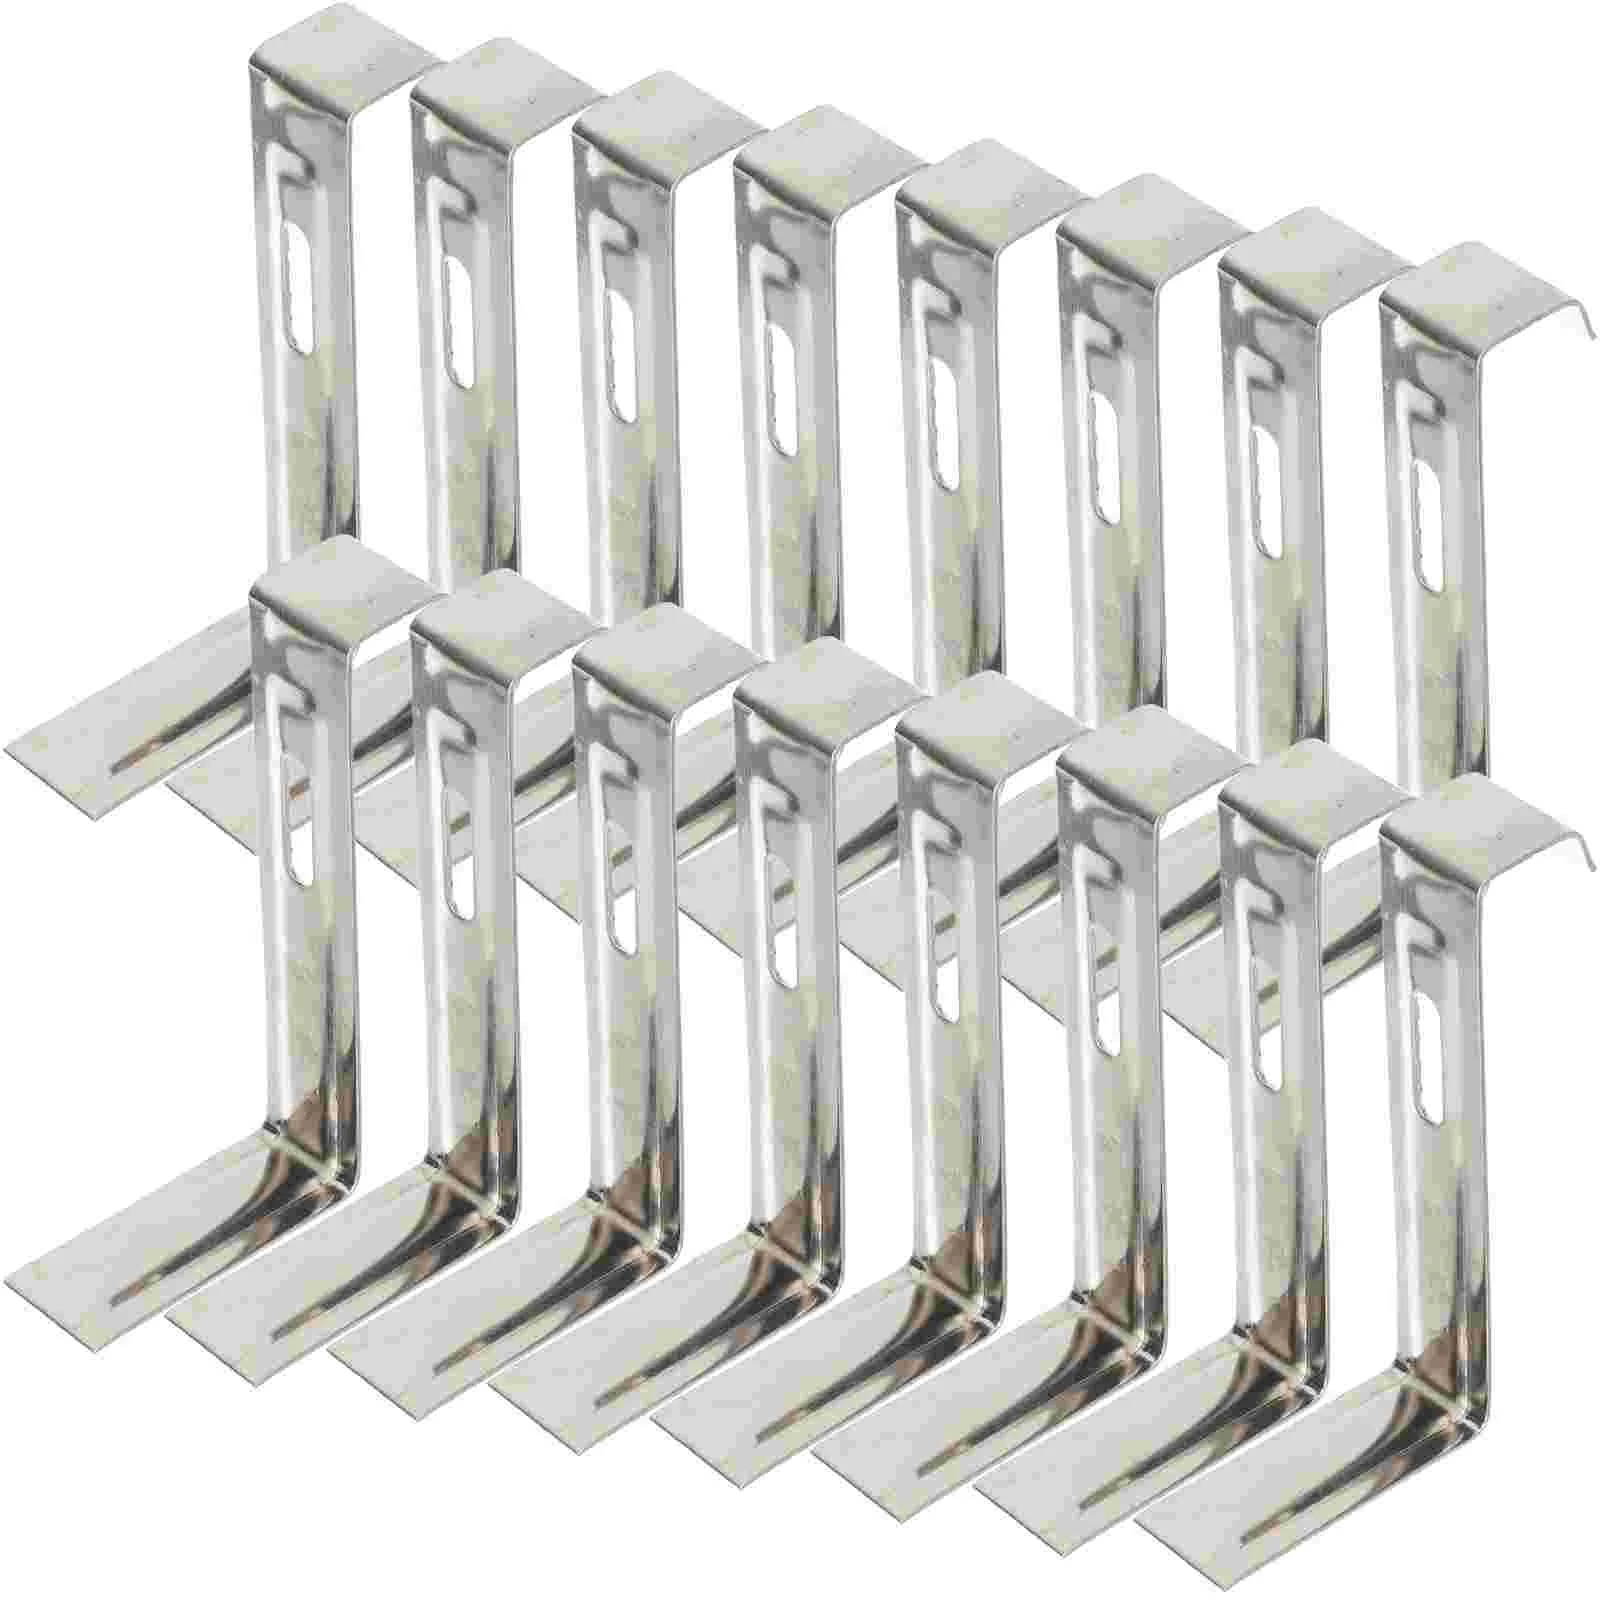 

20 Pcs Non-skid Roof Clip Metal Non-slip Clips Holder Tile Accessory Home Tools Replacement Fix Household Iron